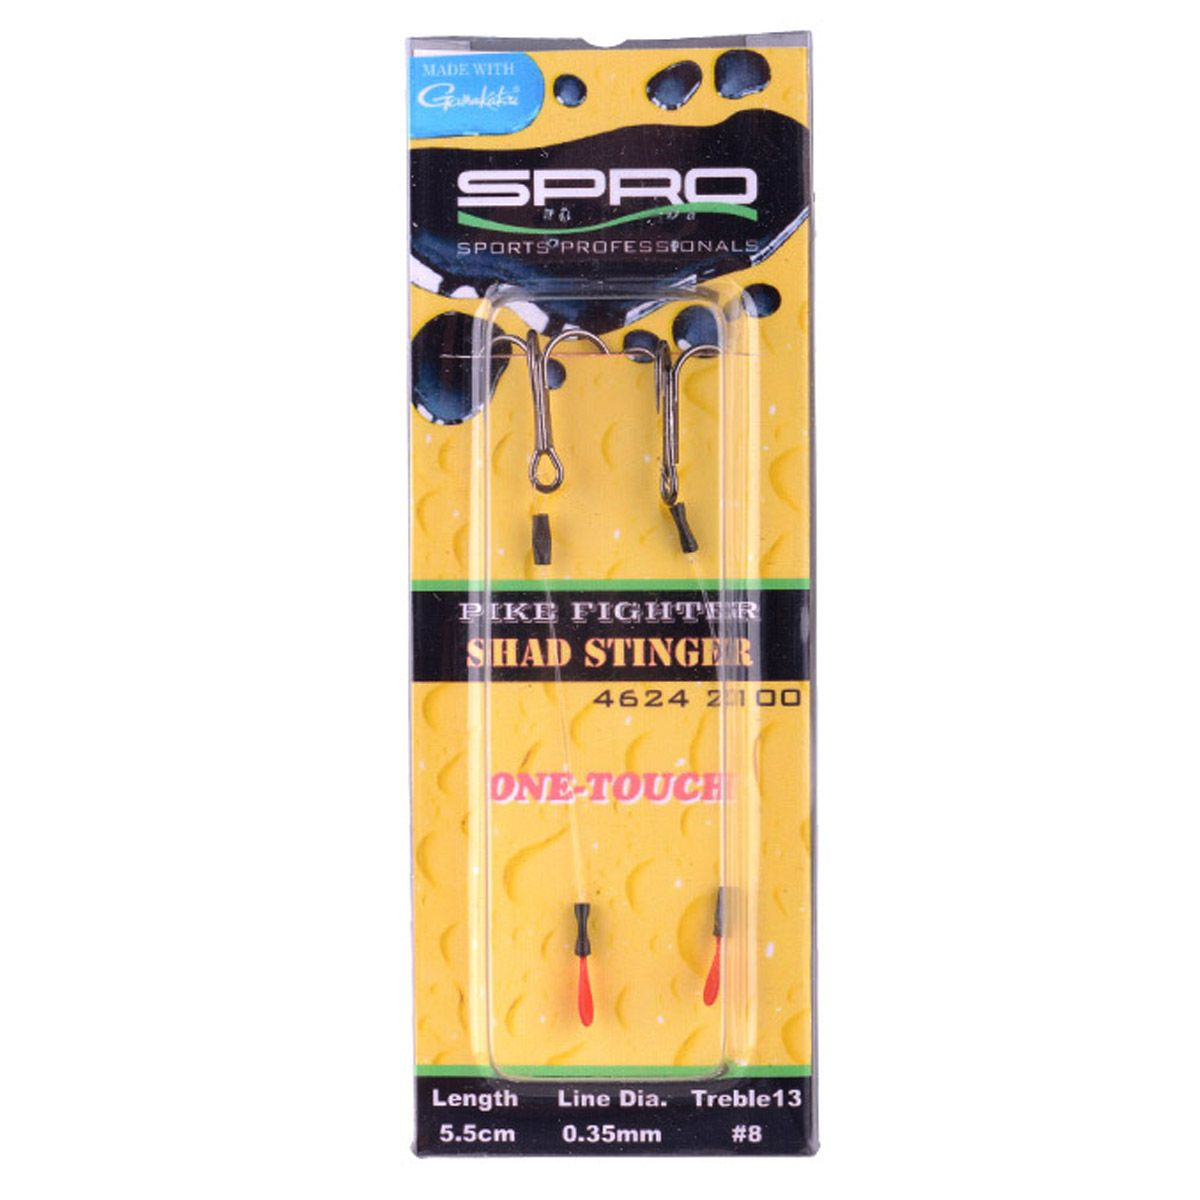 Spro Pike Fighter One-Touch Fine Stinger -  Lengte 3,5 cm Haak 10 -  Lengte 5,5 cm Haak 10 -  Lengte 3,5 cm Haak 8 -  Lengte 5,5 cm Haak 8 -  Lengte 4,5 cm Haak 8 -  Lengte 4,5 cm Haak 6